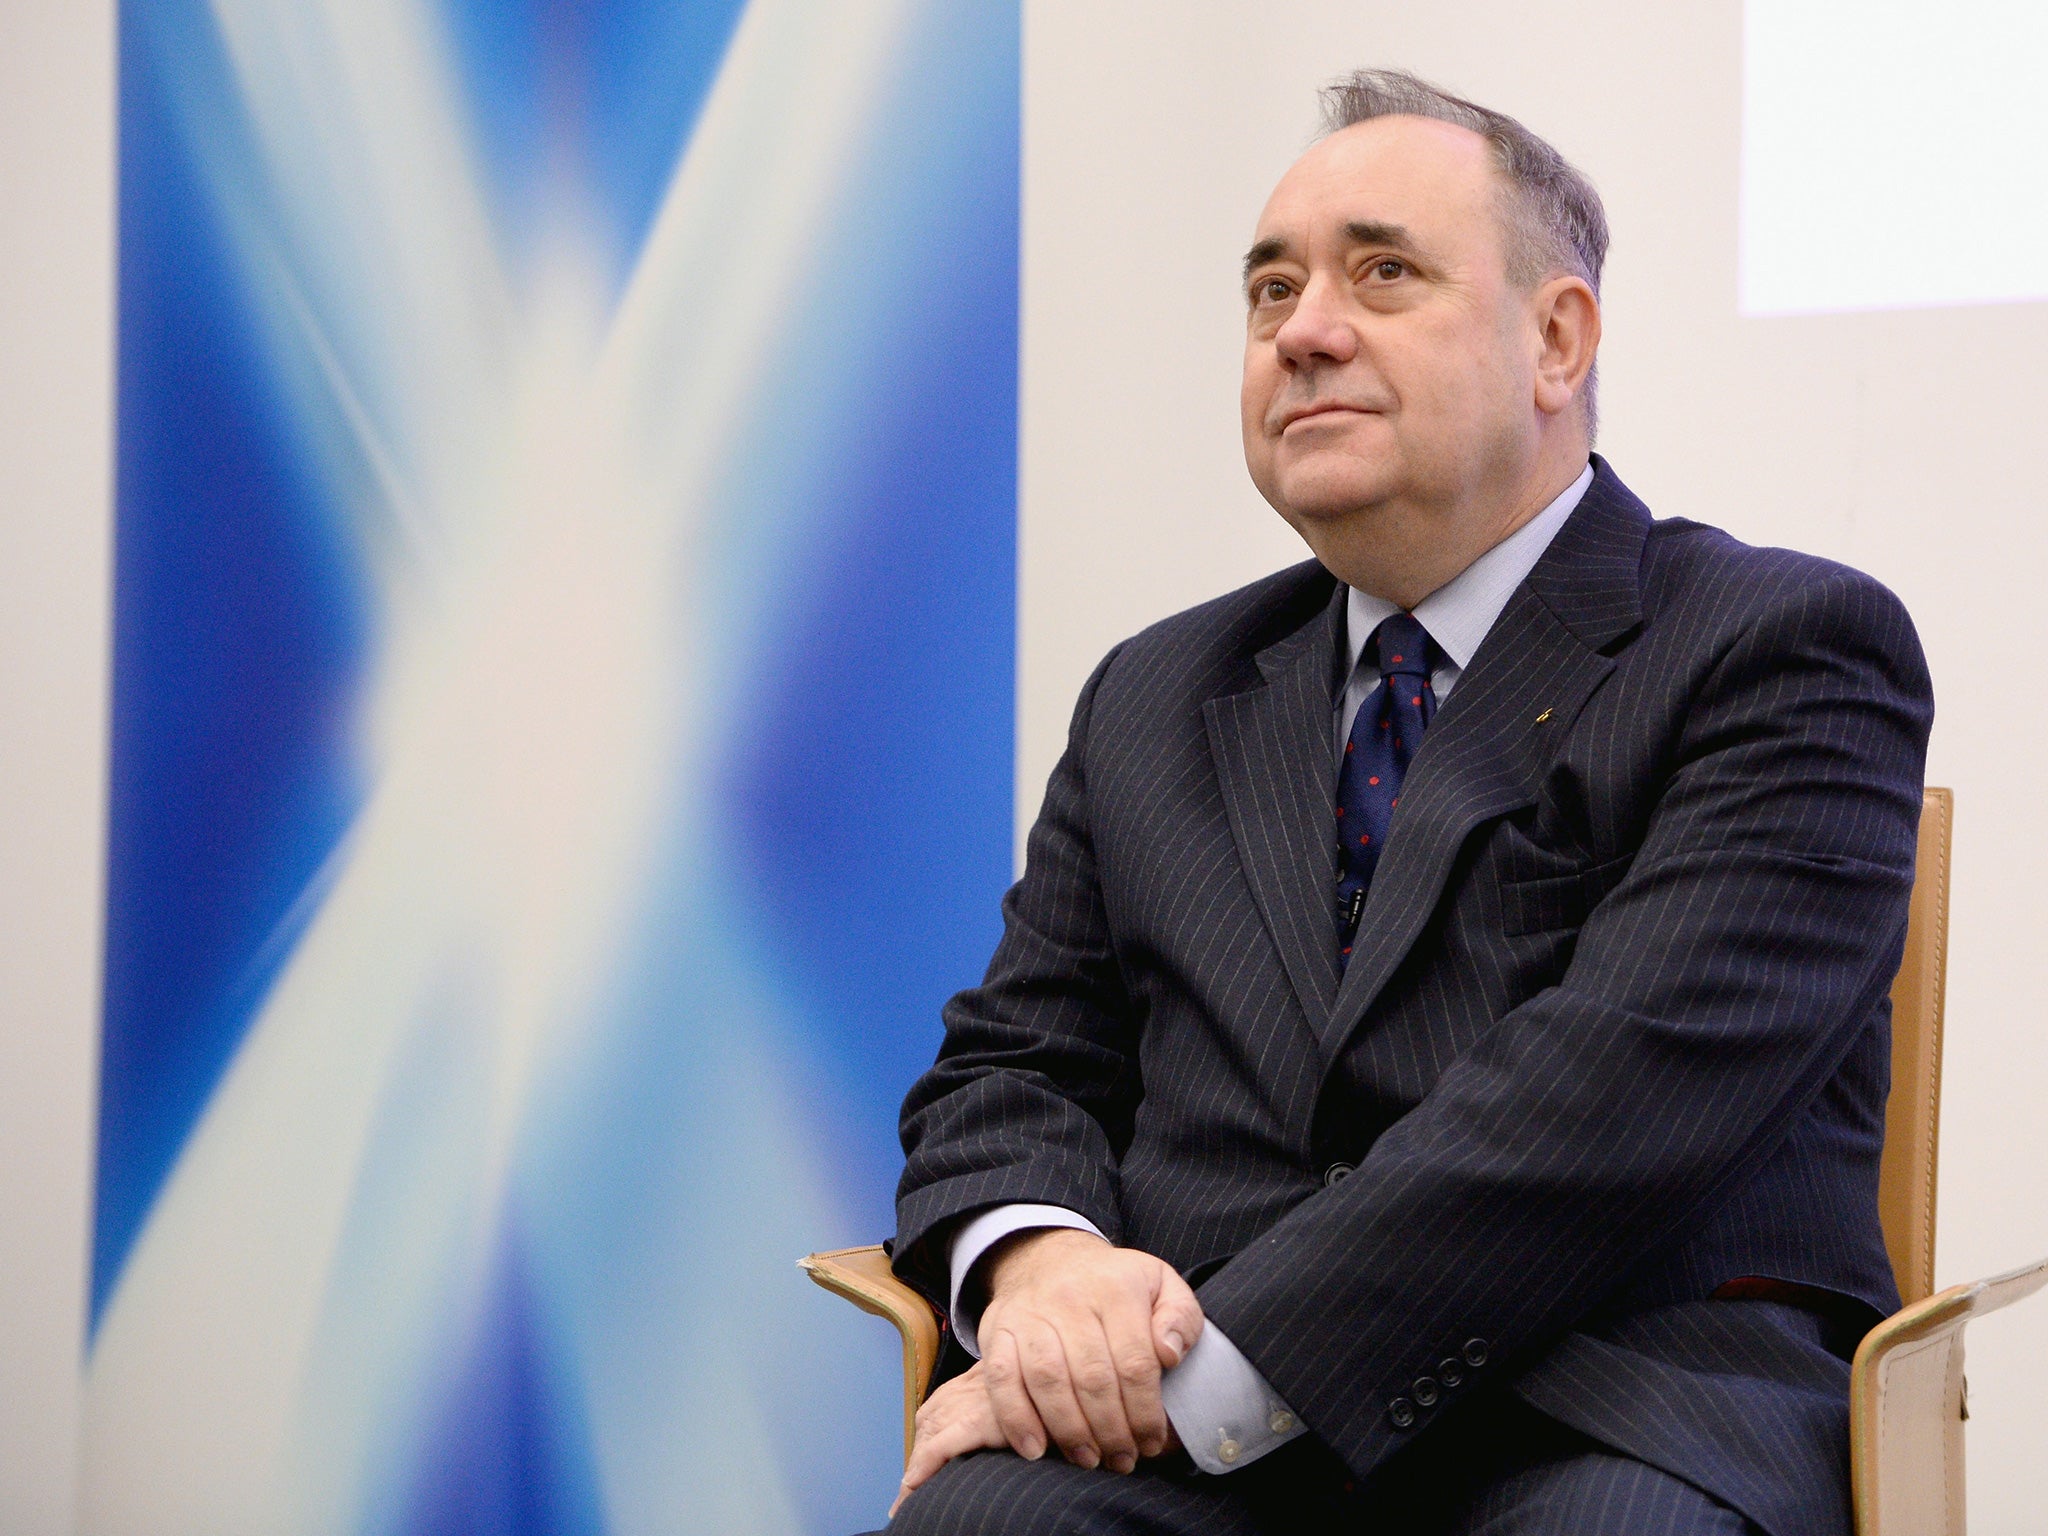 Salmond: The foreign affairs spokesman for a party that wants to become a foreign country.